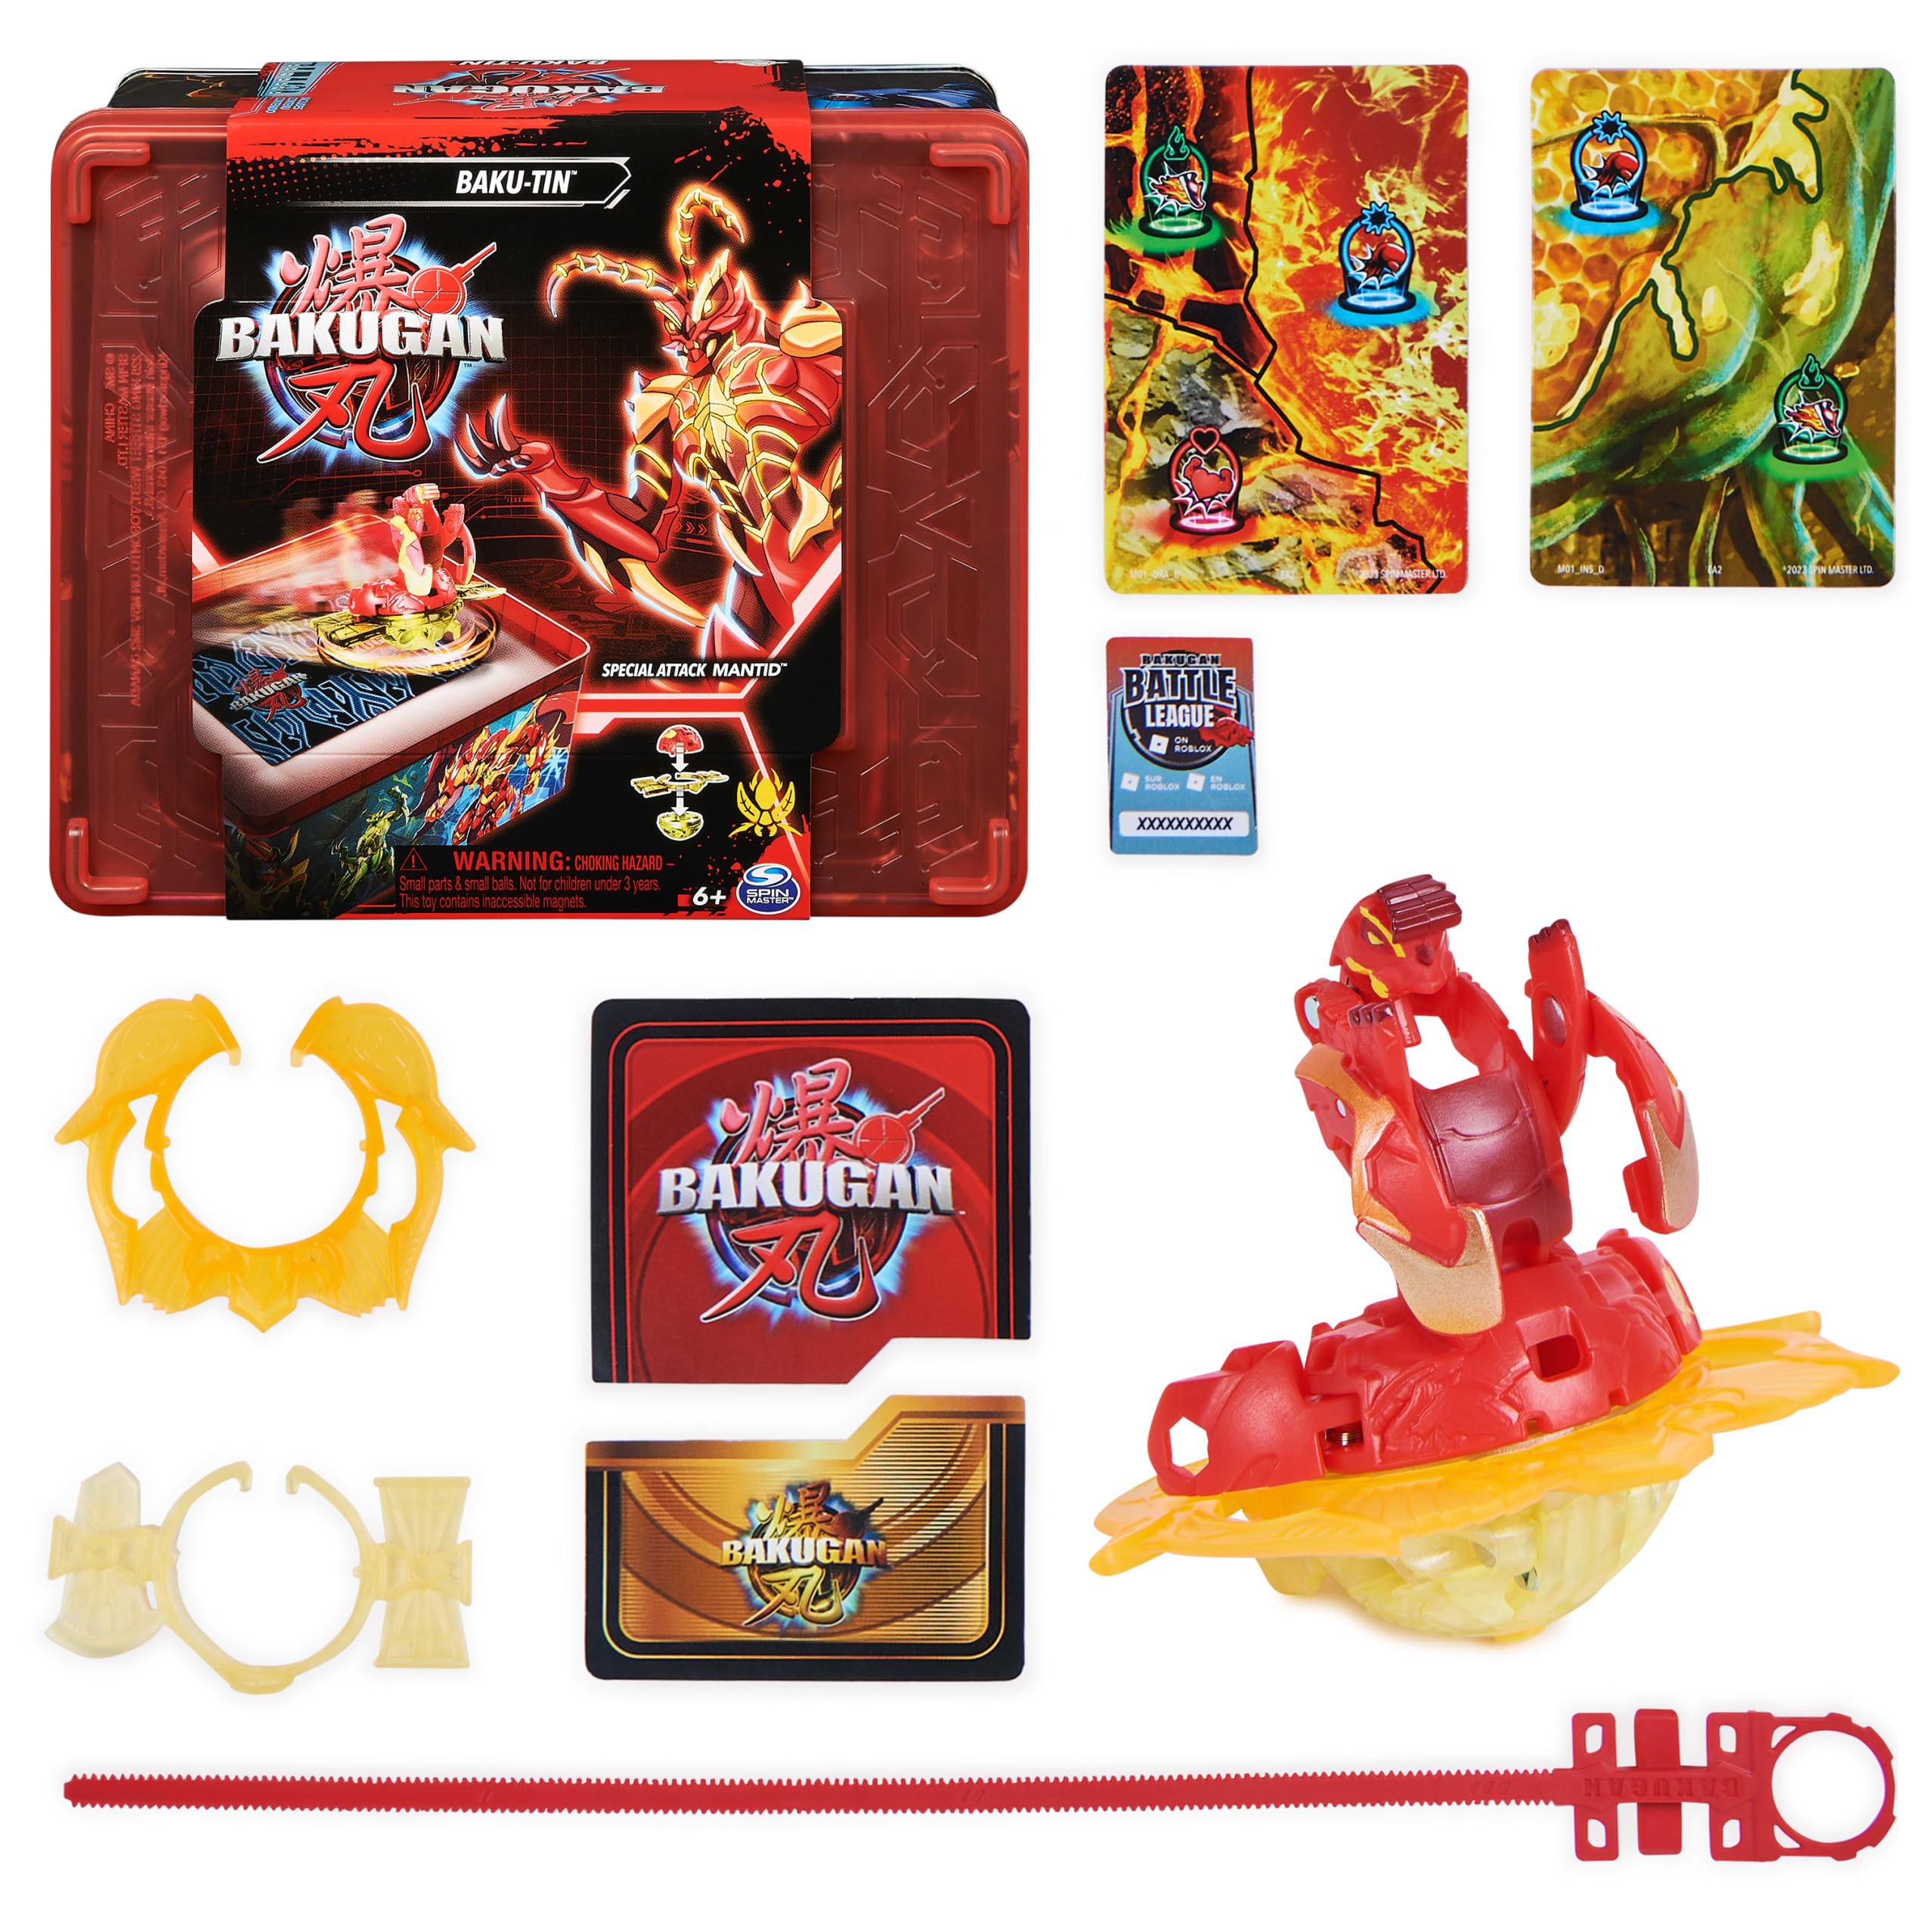 Bakugan Spinning Special Attack Mantid Action Figure Toy Set w/ Baku-Tin Arena/Storage, XL Rip Cord, & Accessories $5.30 + Free Shipping w/ Prime or on $35+